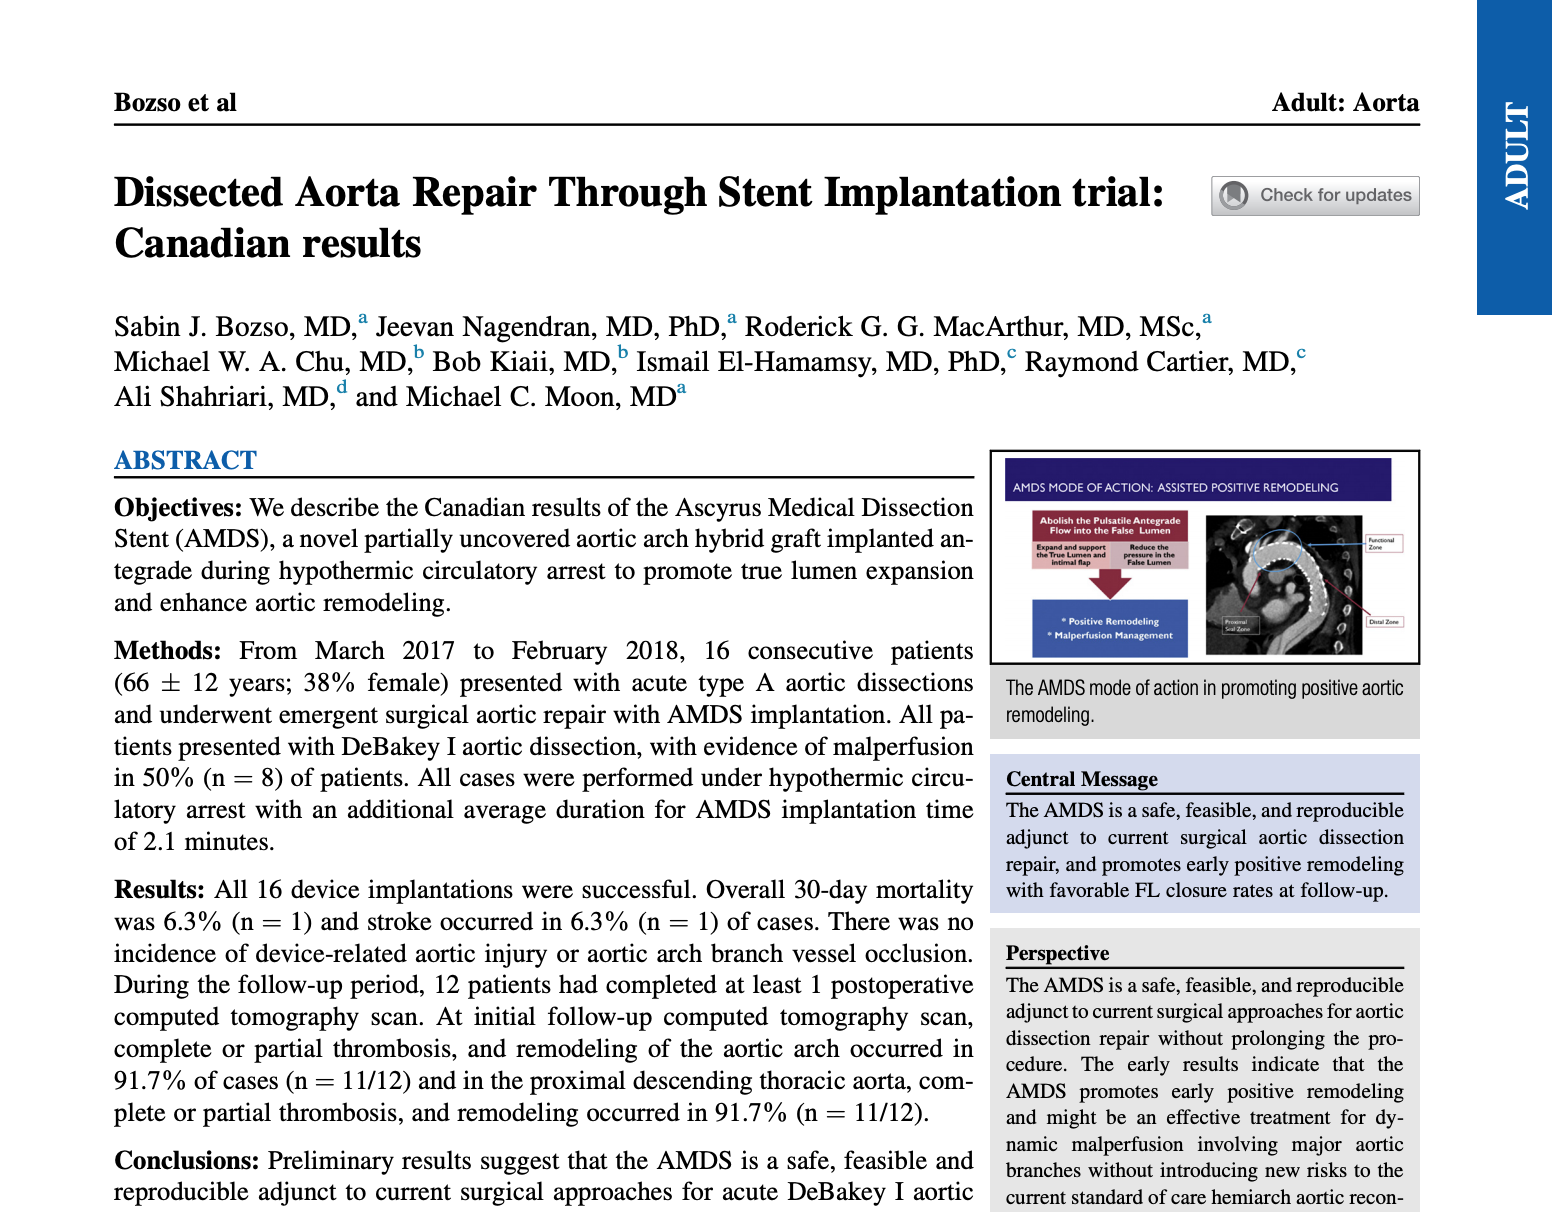 Dissected Aorta Repair Through Stent Implantation trial: Canadian results